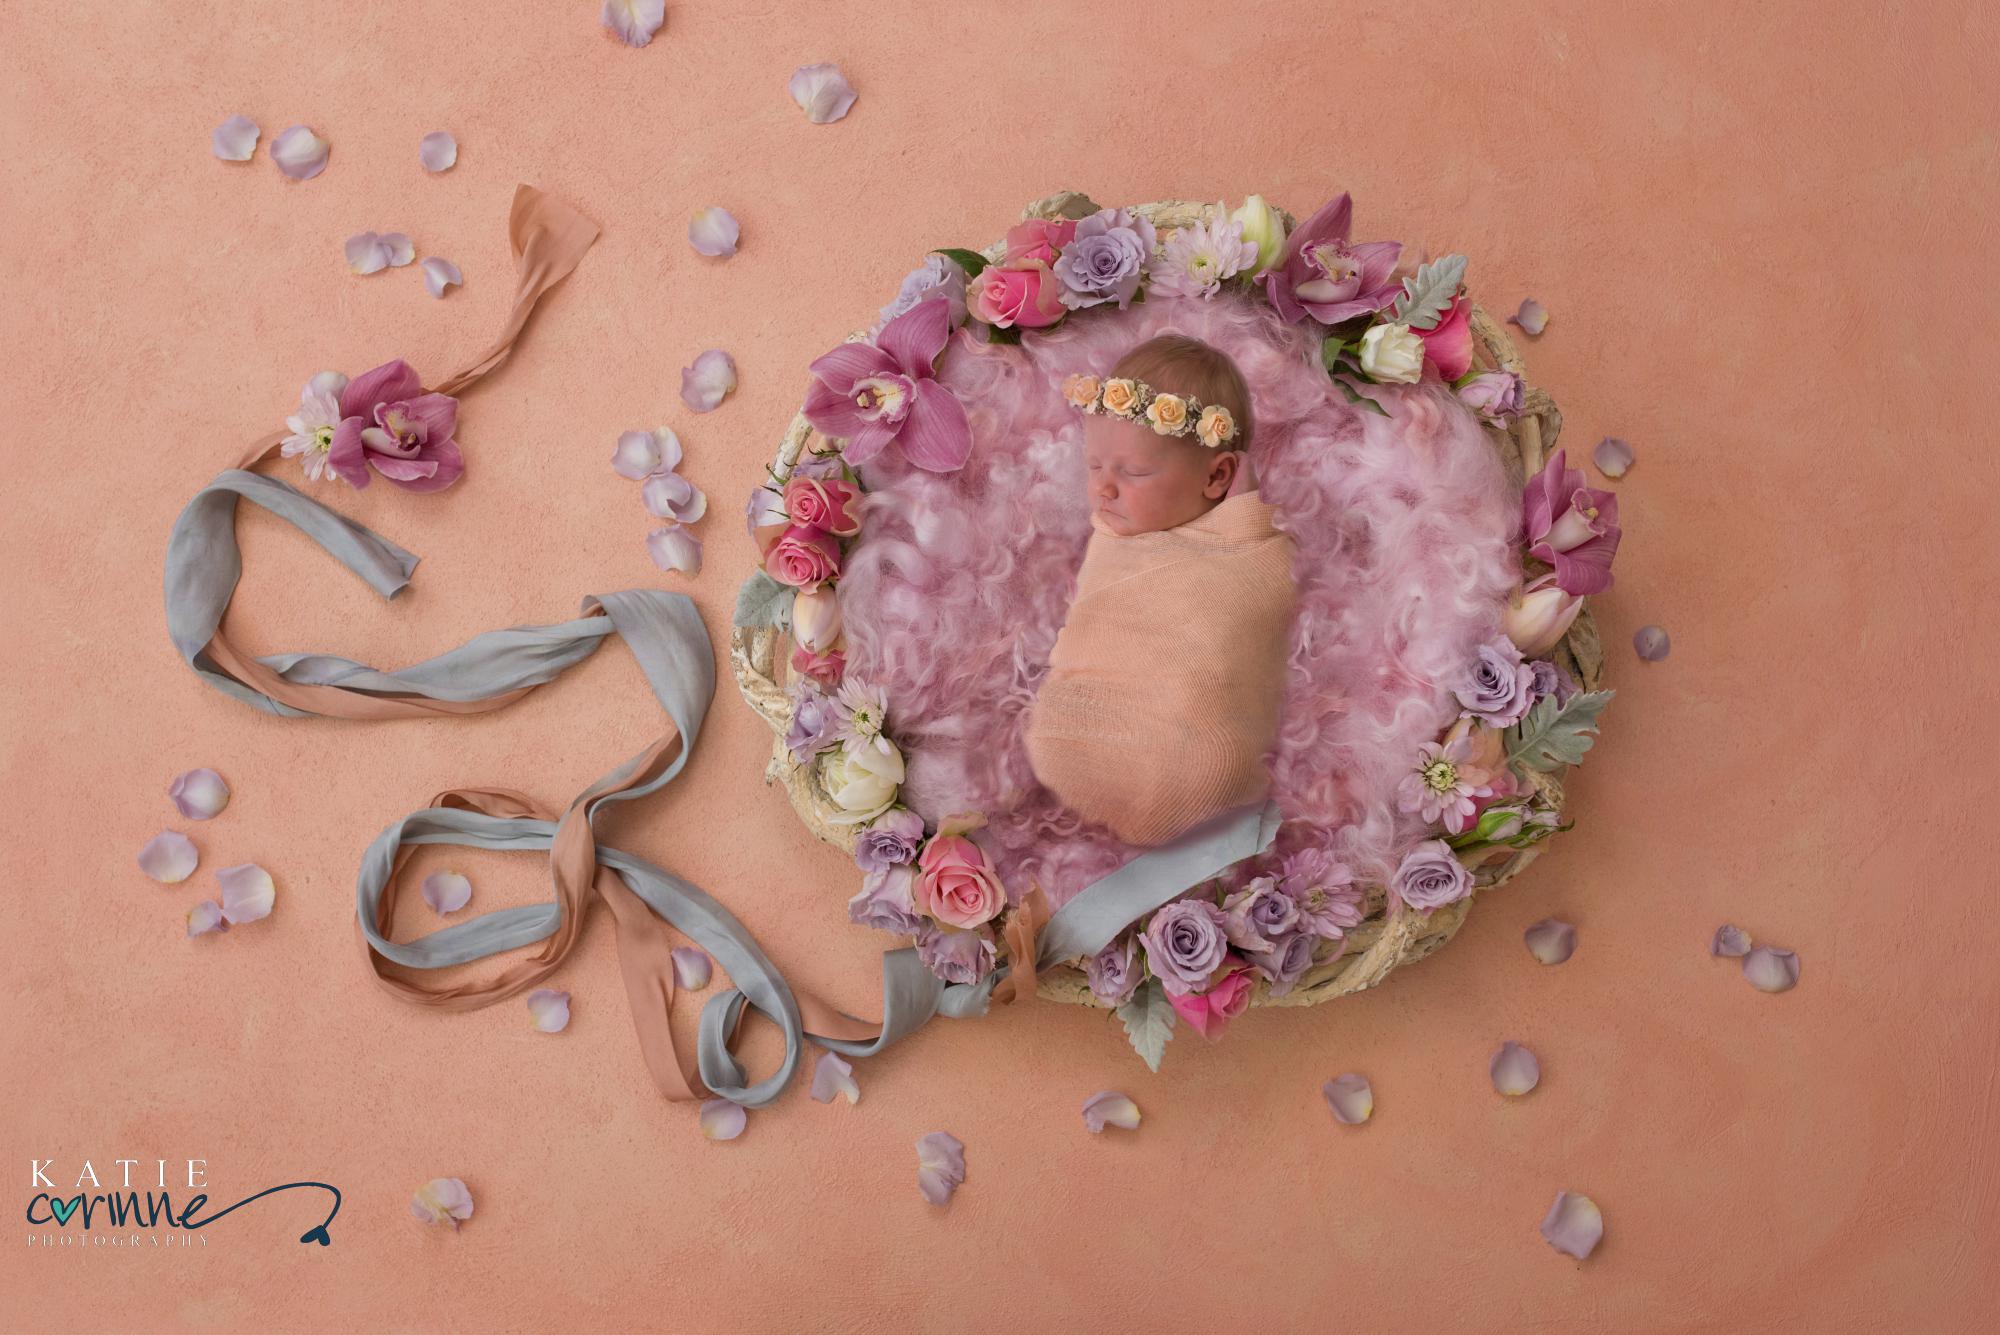 Newborn baby girl posed among flowers and ribbons